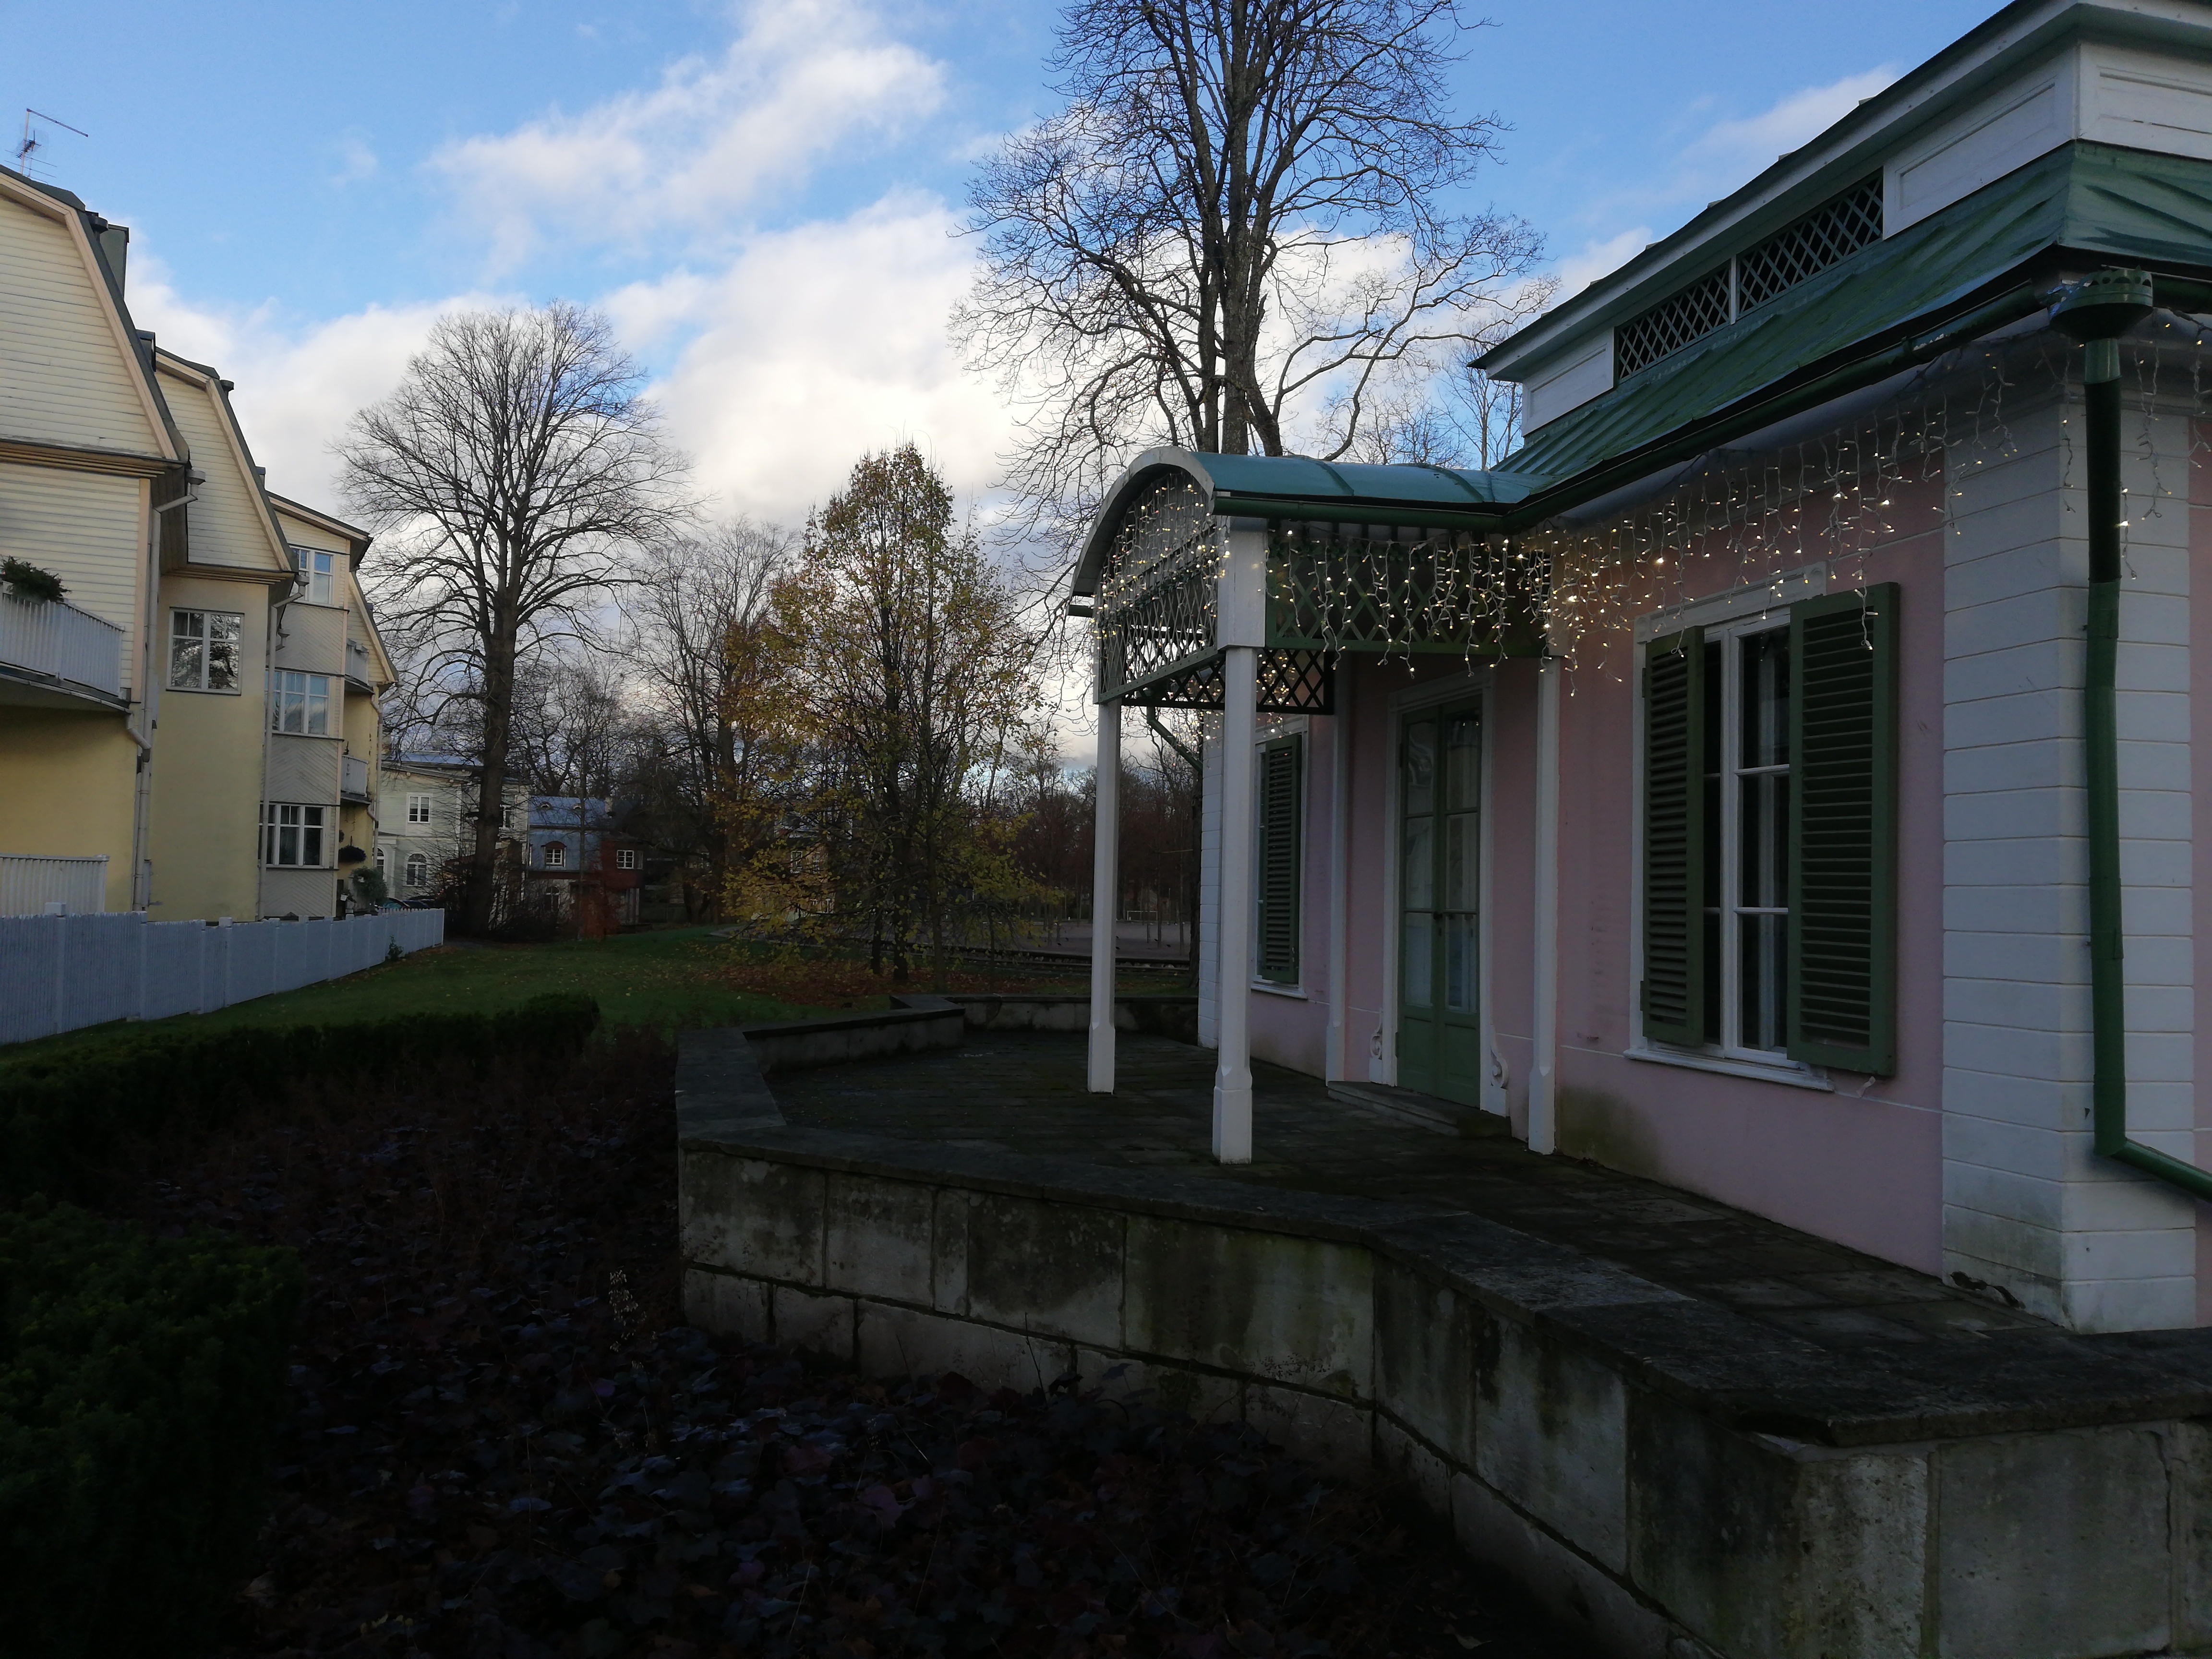 View of the building in Kadriorg. rephoto